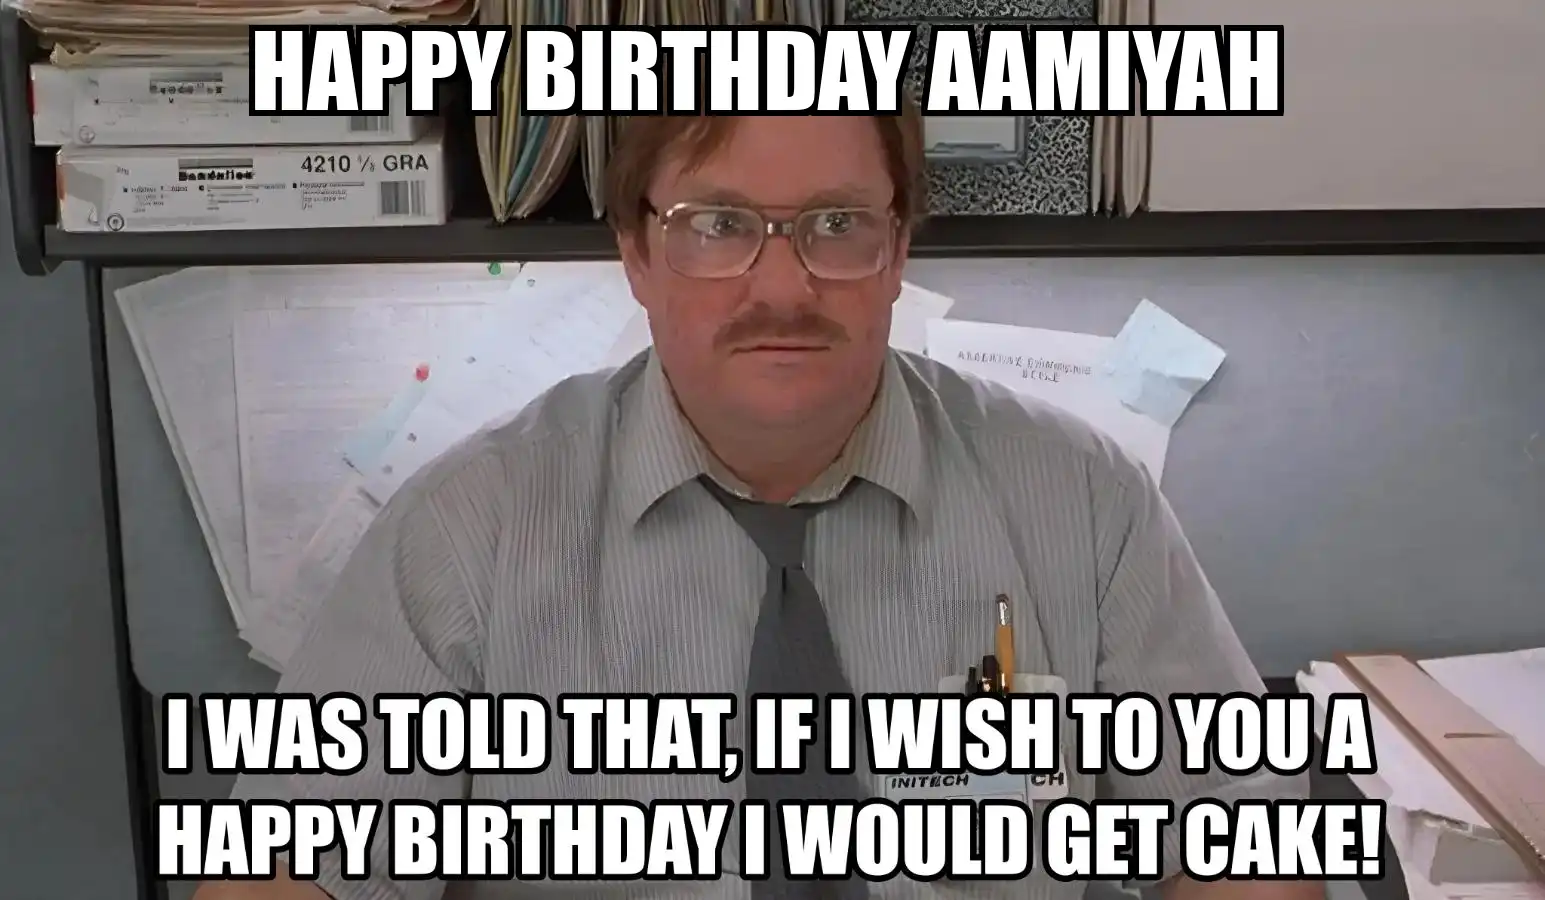 Happy Birthday Aamiyah I Would Get A Cake Meme